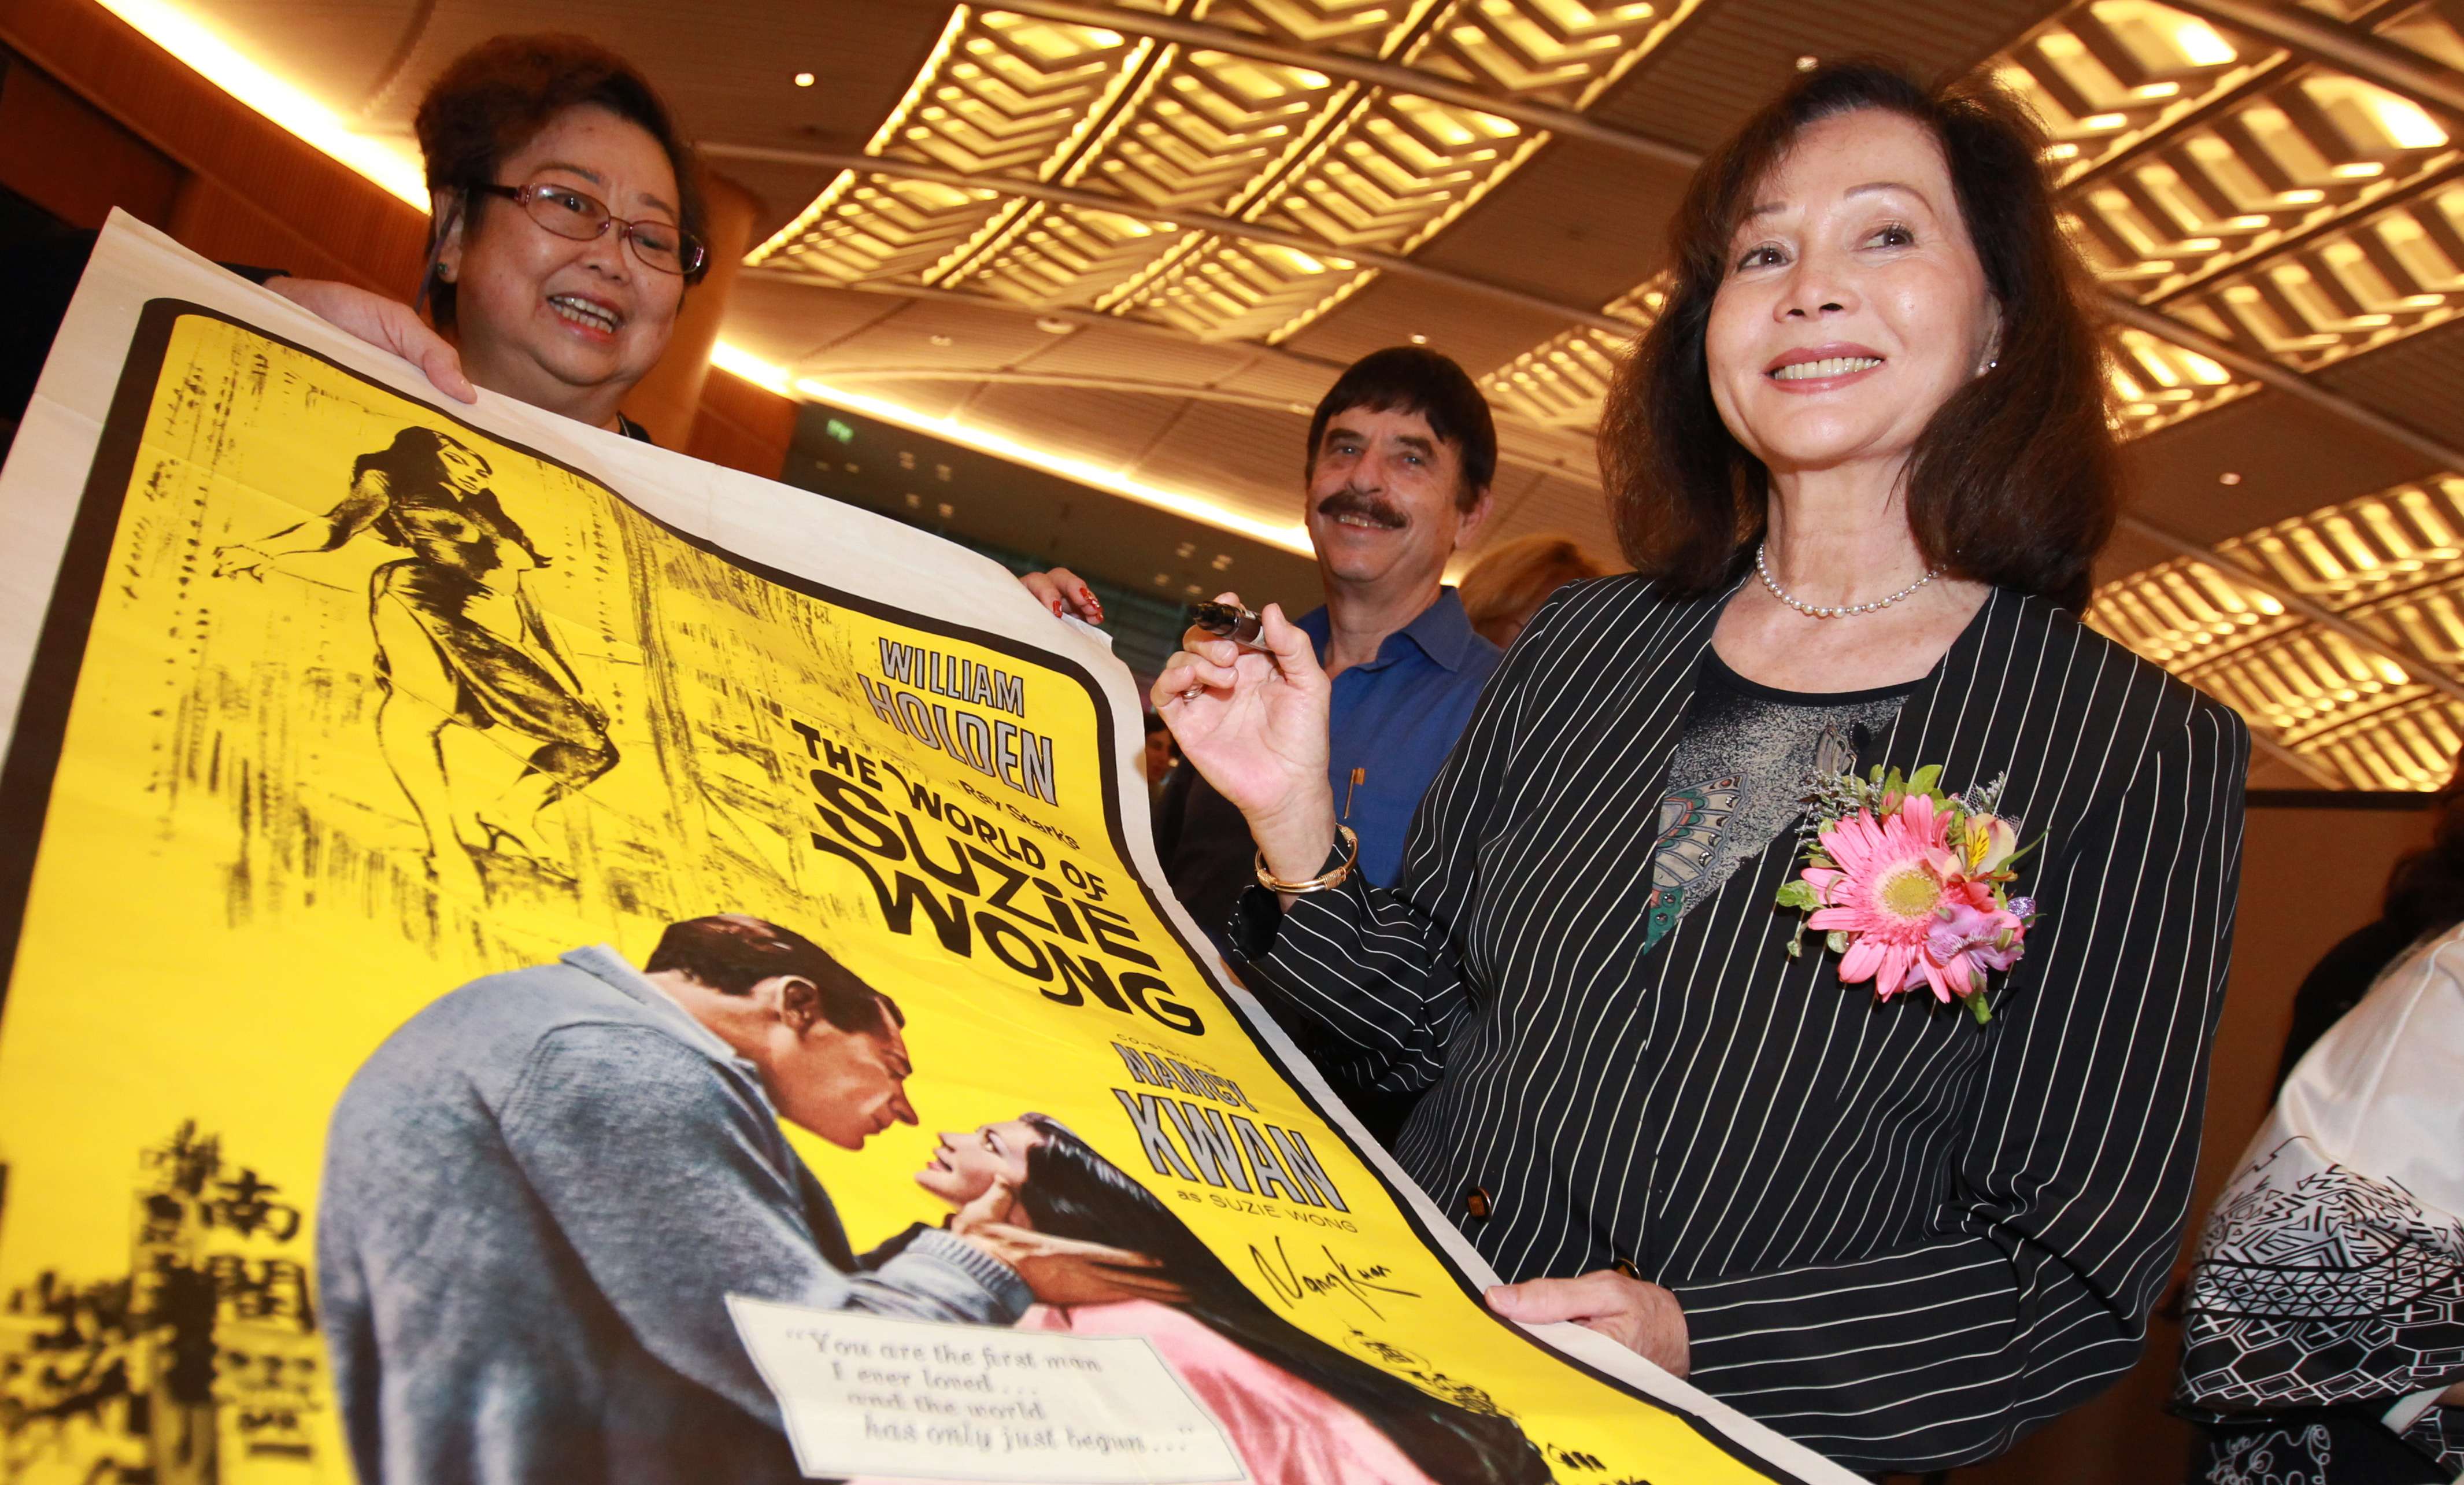 Nancy Kwan, star of the movie “The World of Suzie Wong”, signs a poster 50 years after the film’s release. Photo: Felix Wong